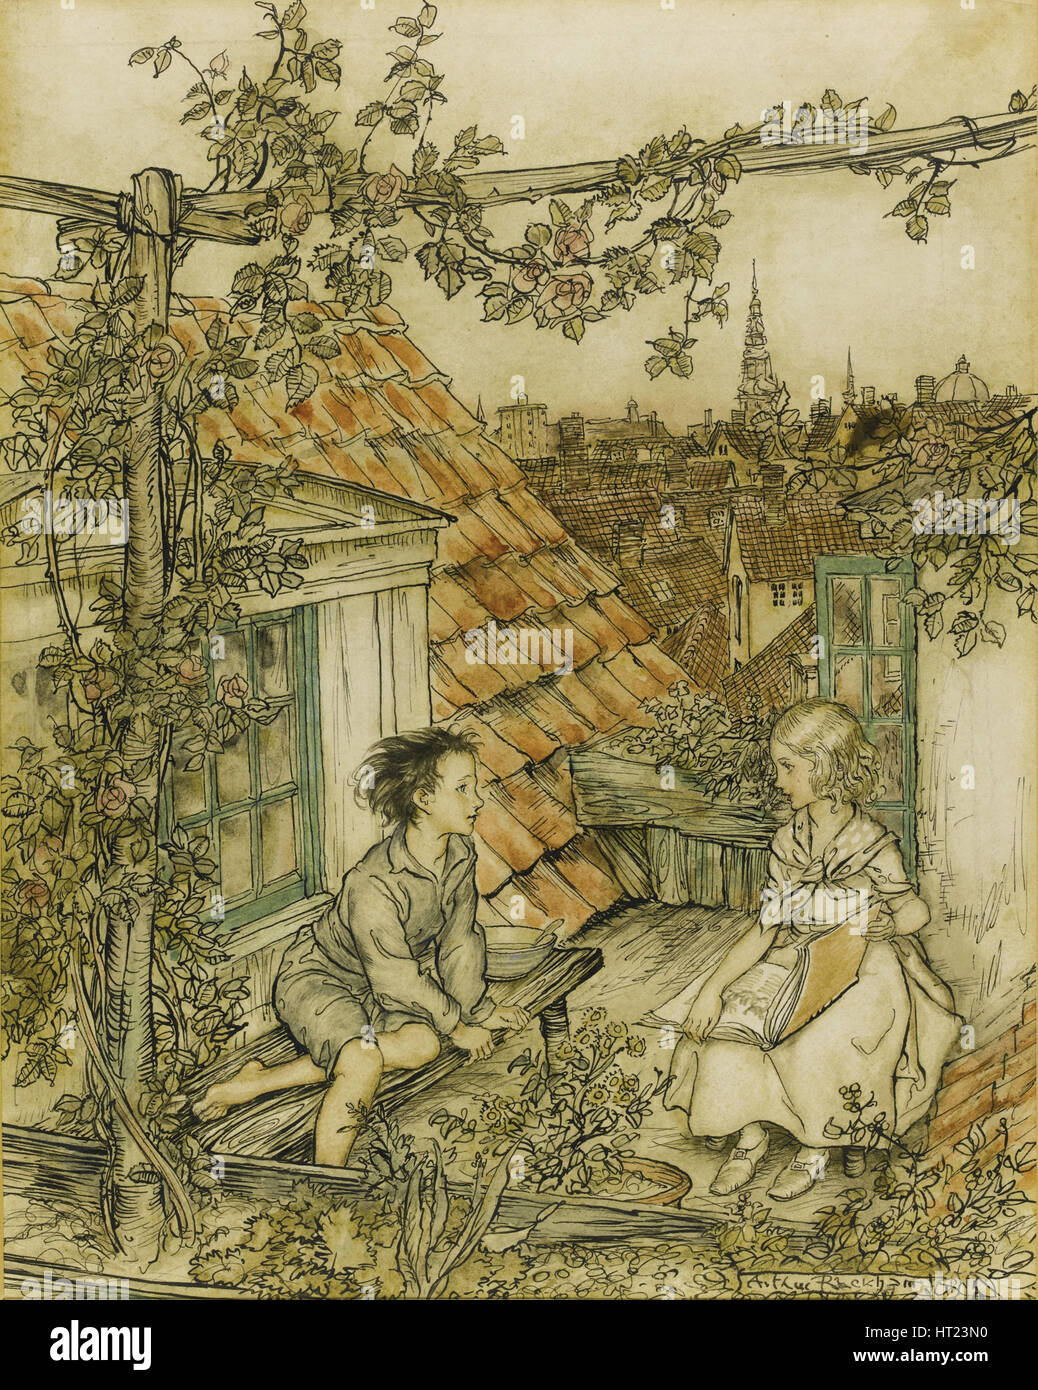 Kay and Gerda in their garden high up on the roof. Illustration for the tale of The Snow Queen, 18 Artist: Rackham, Arthur (1867-1939) Stock Photo